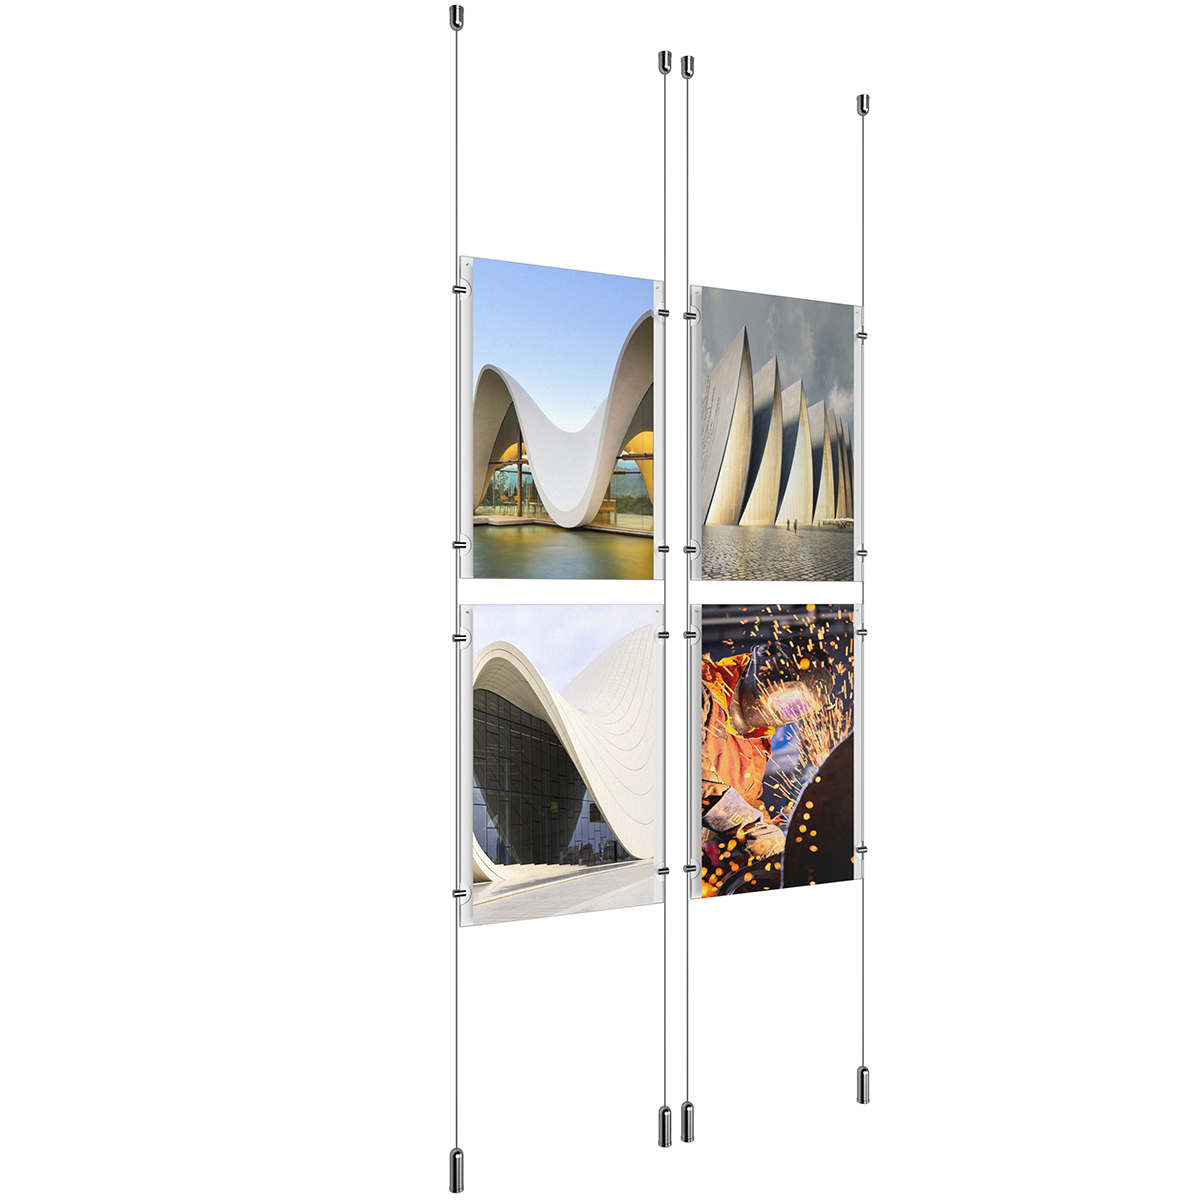 (4) 11'' Width x 17'' Height Clear Acrylic Frame & (4) Ceiling-to-Floor Aluminum Clear Anodized Cable Systems with (16) Single-Sided Panel Grippers